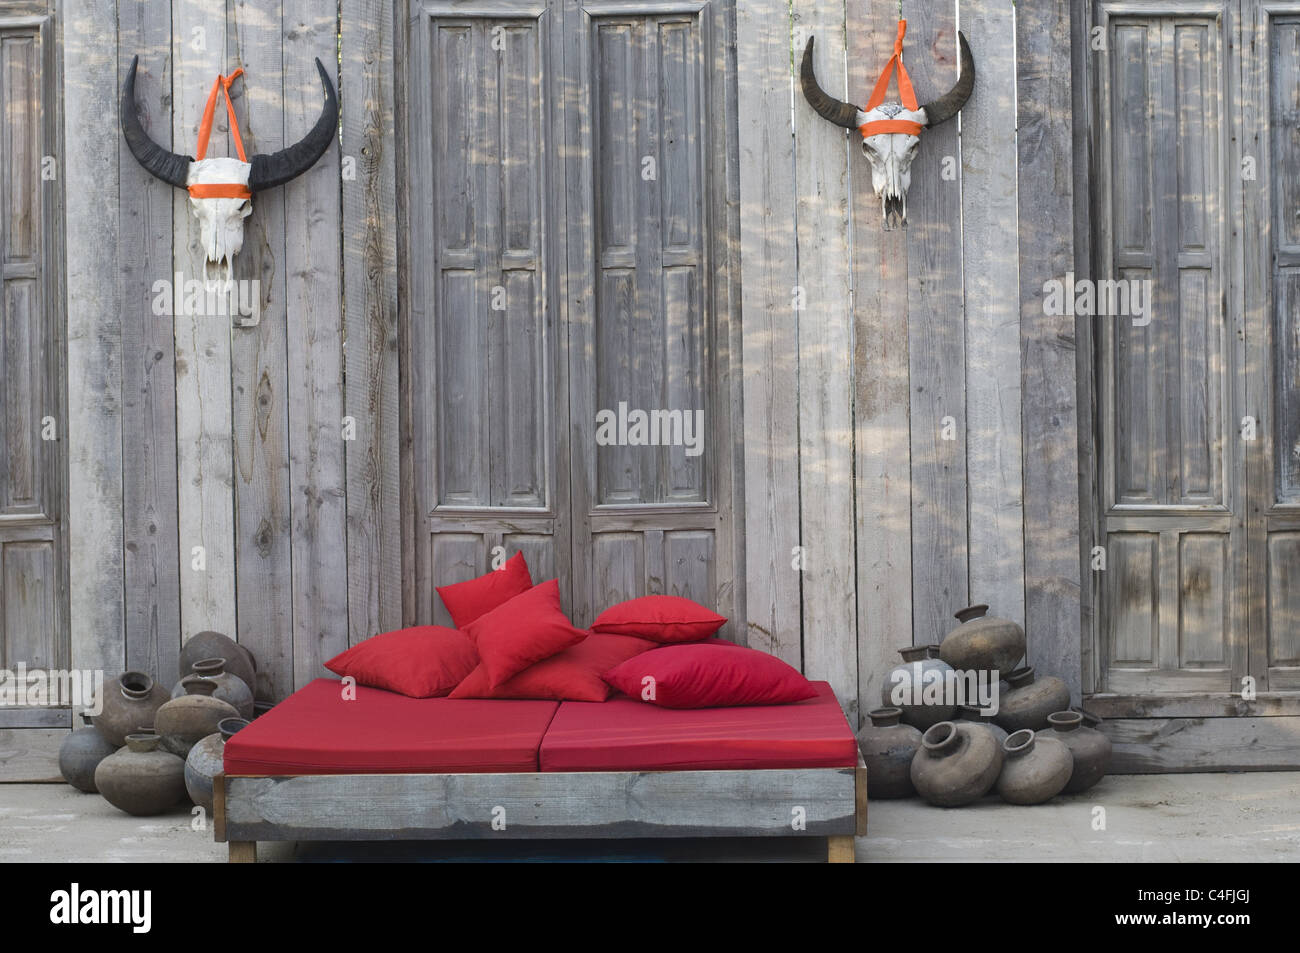 Bed made of rustic wood Stock Photo